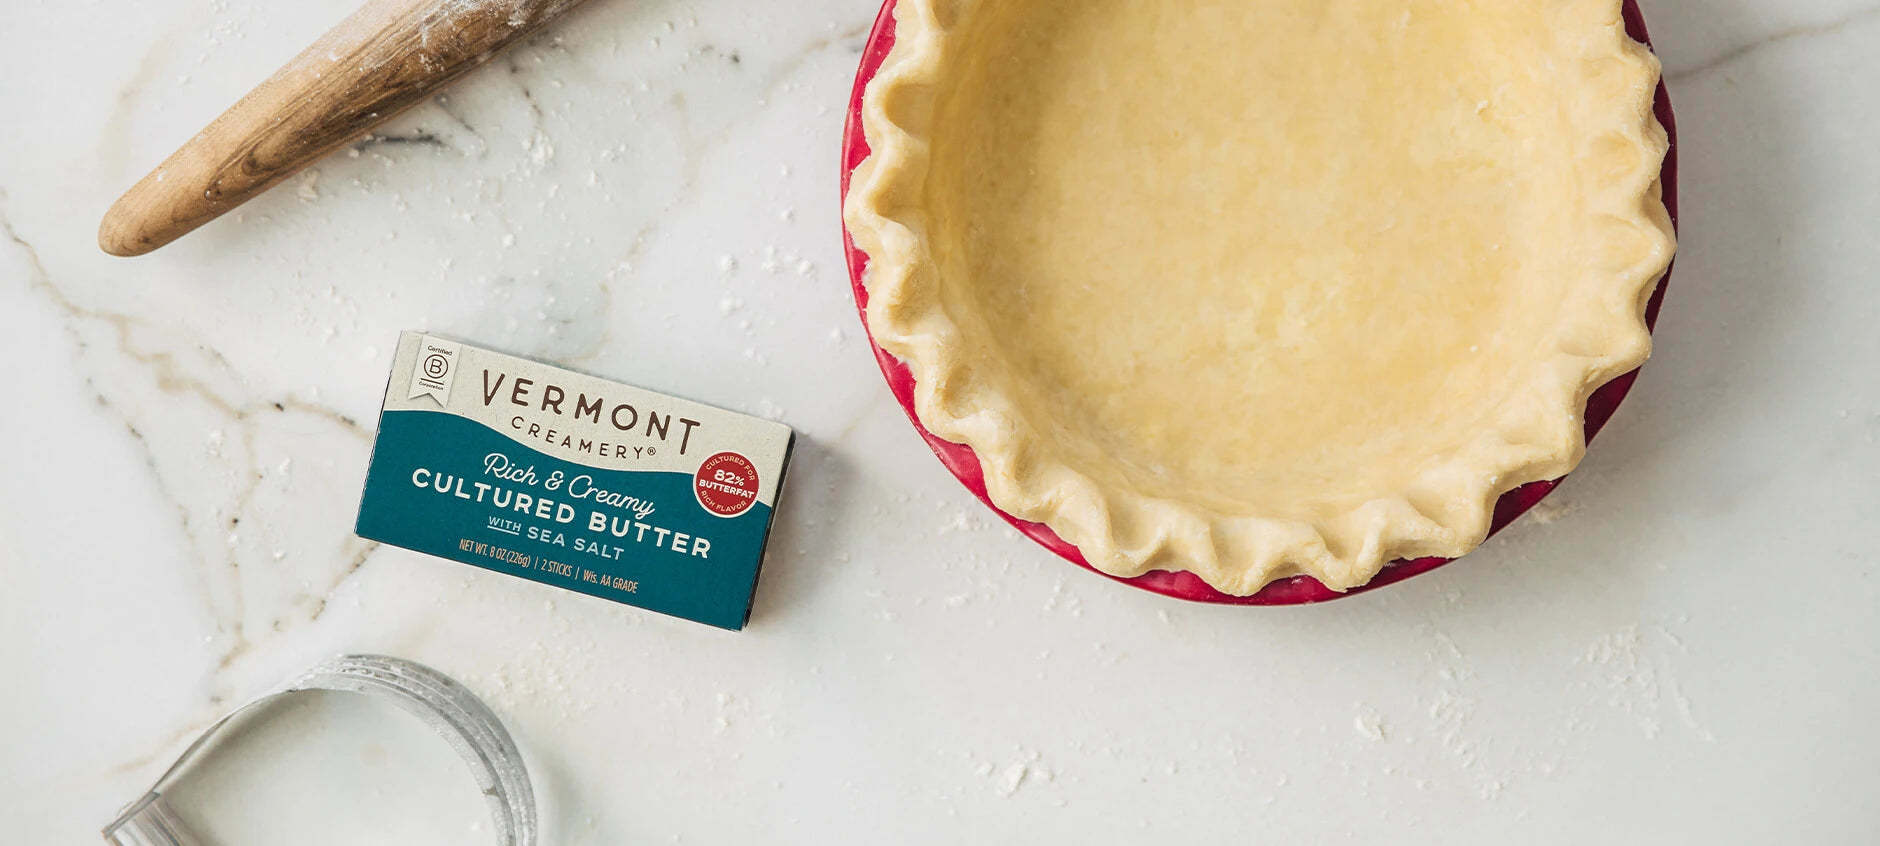 Vermont Creamery Cultured Butter Next to Unbaked Pie Crust